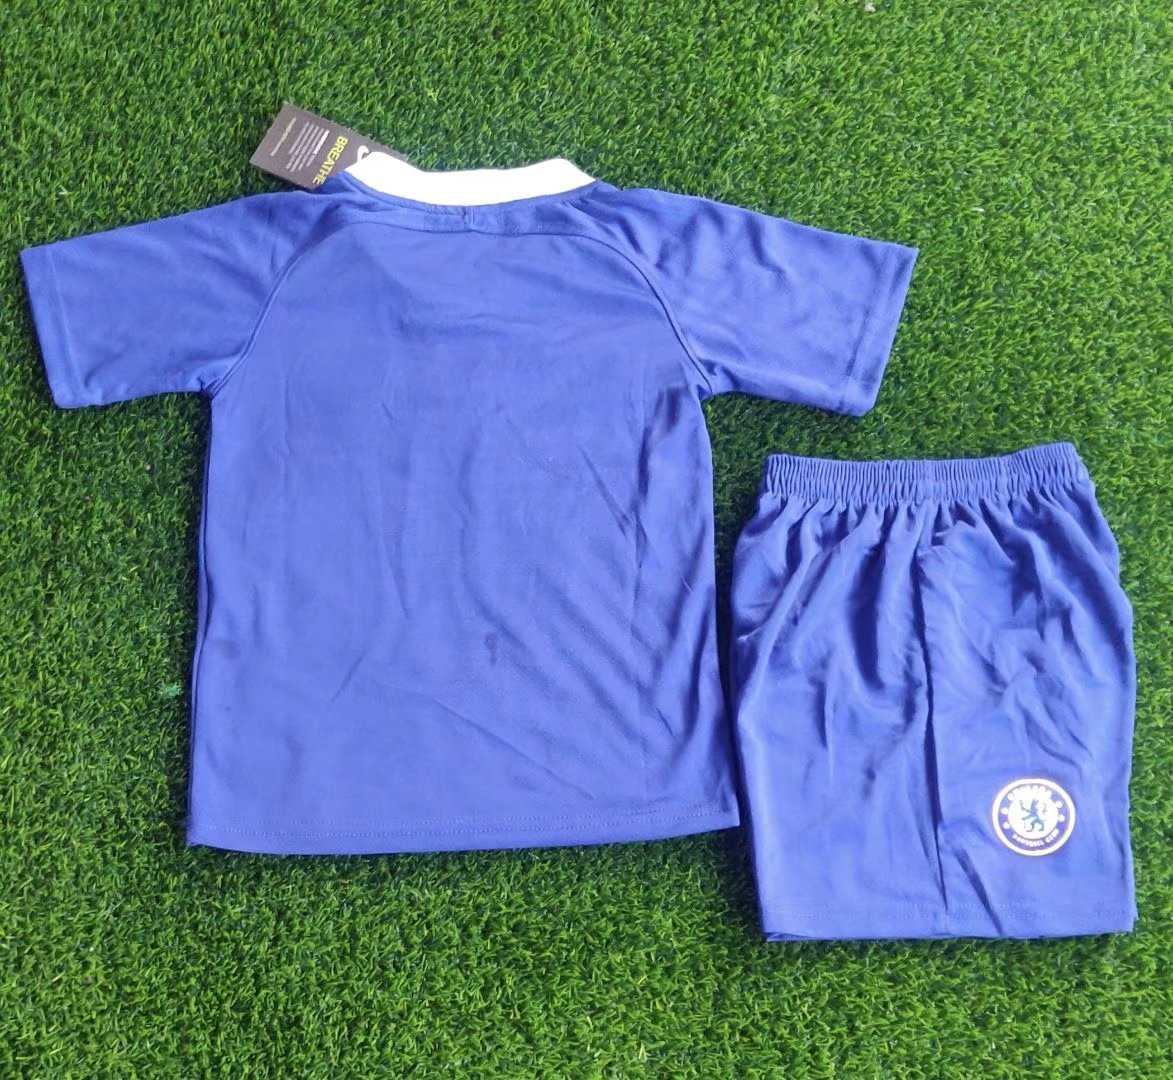 Chelsea Soccer Jersey + Short Replica Home Youth 2022/23